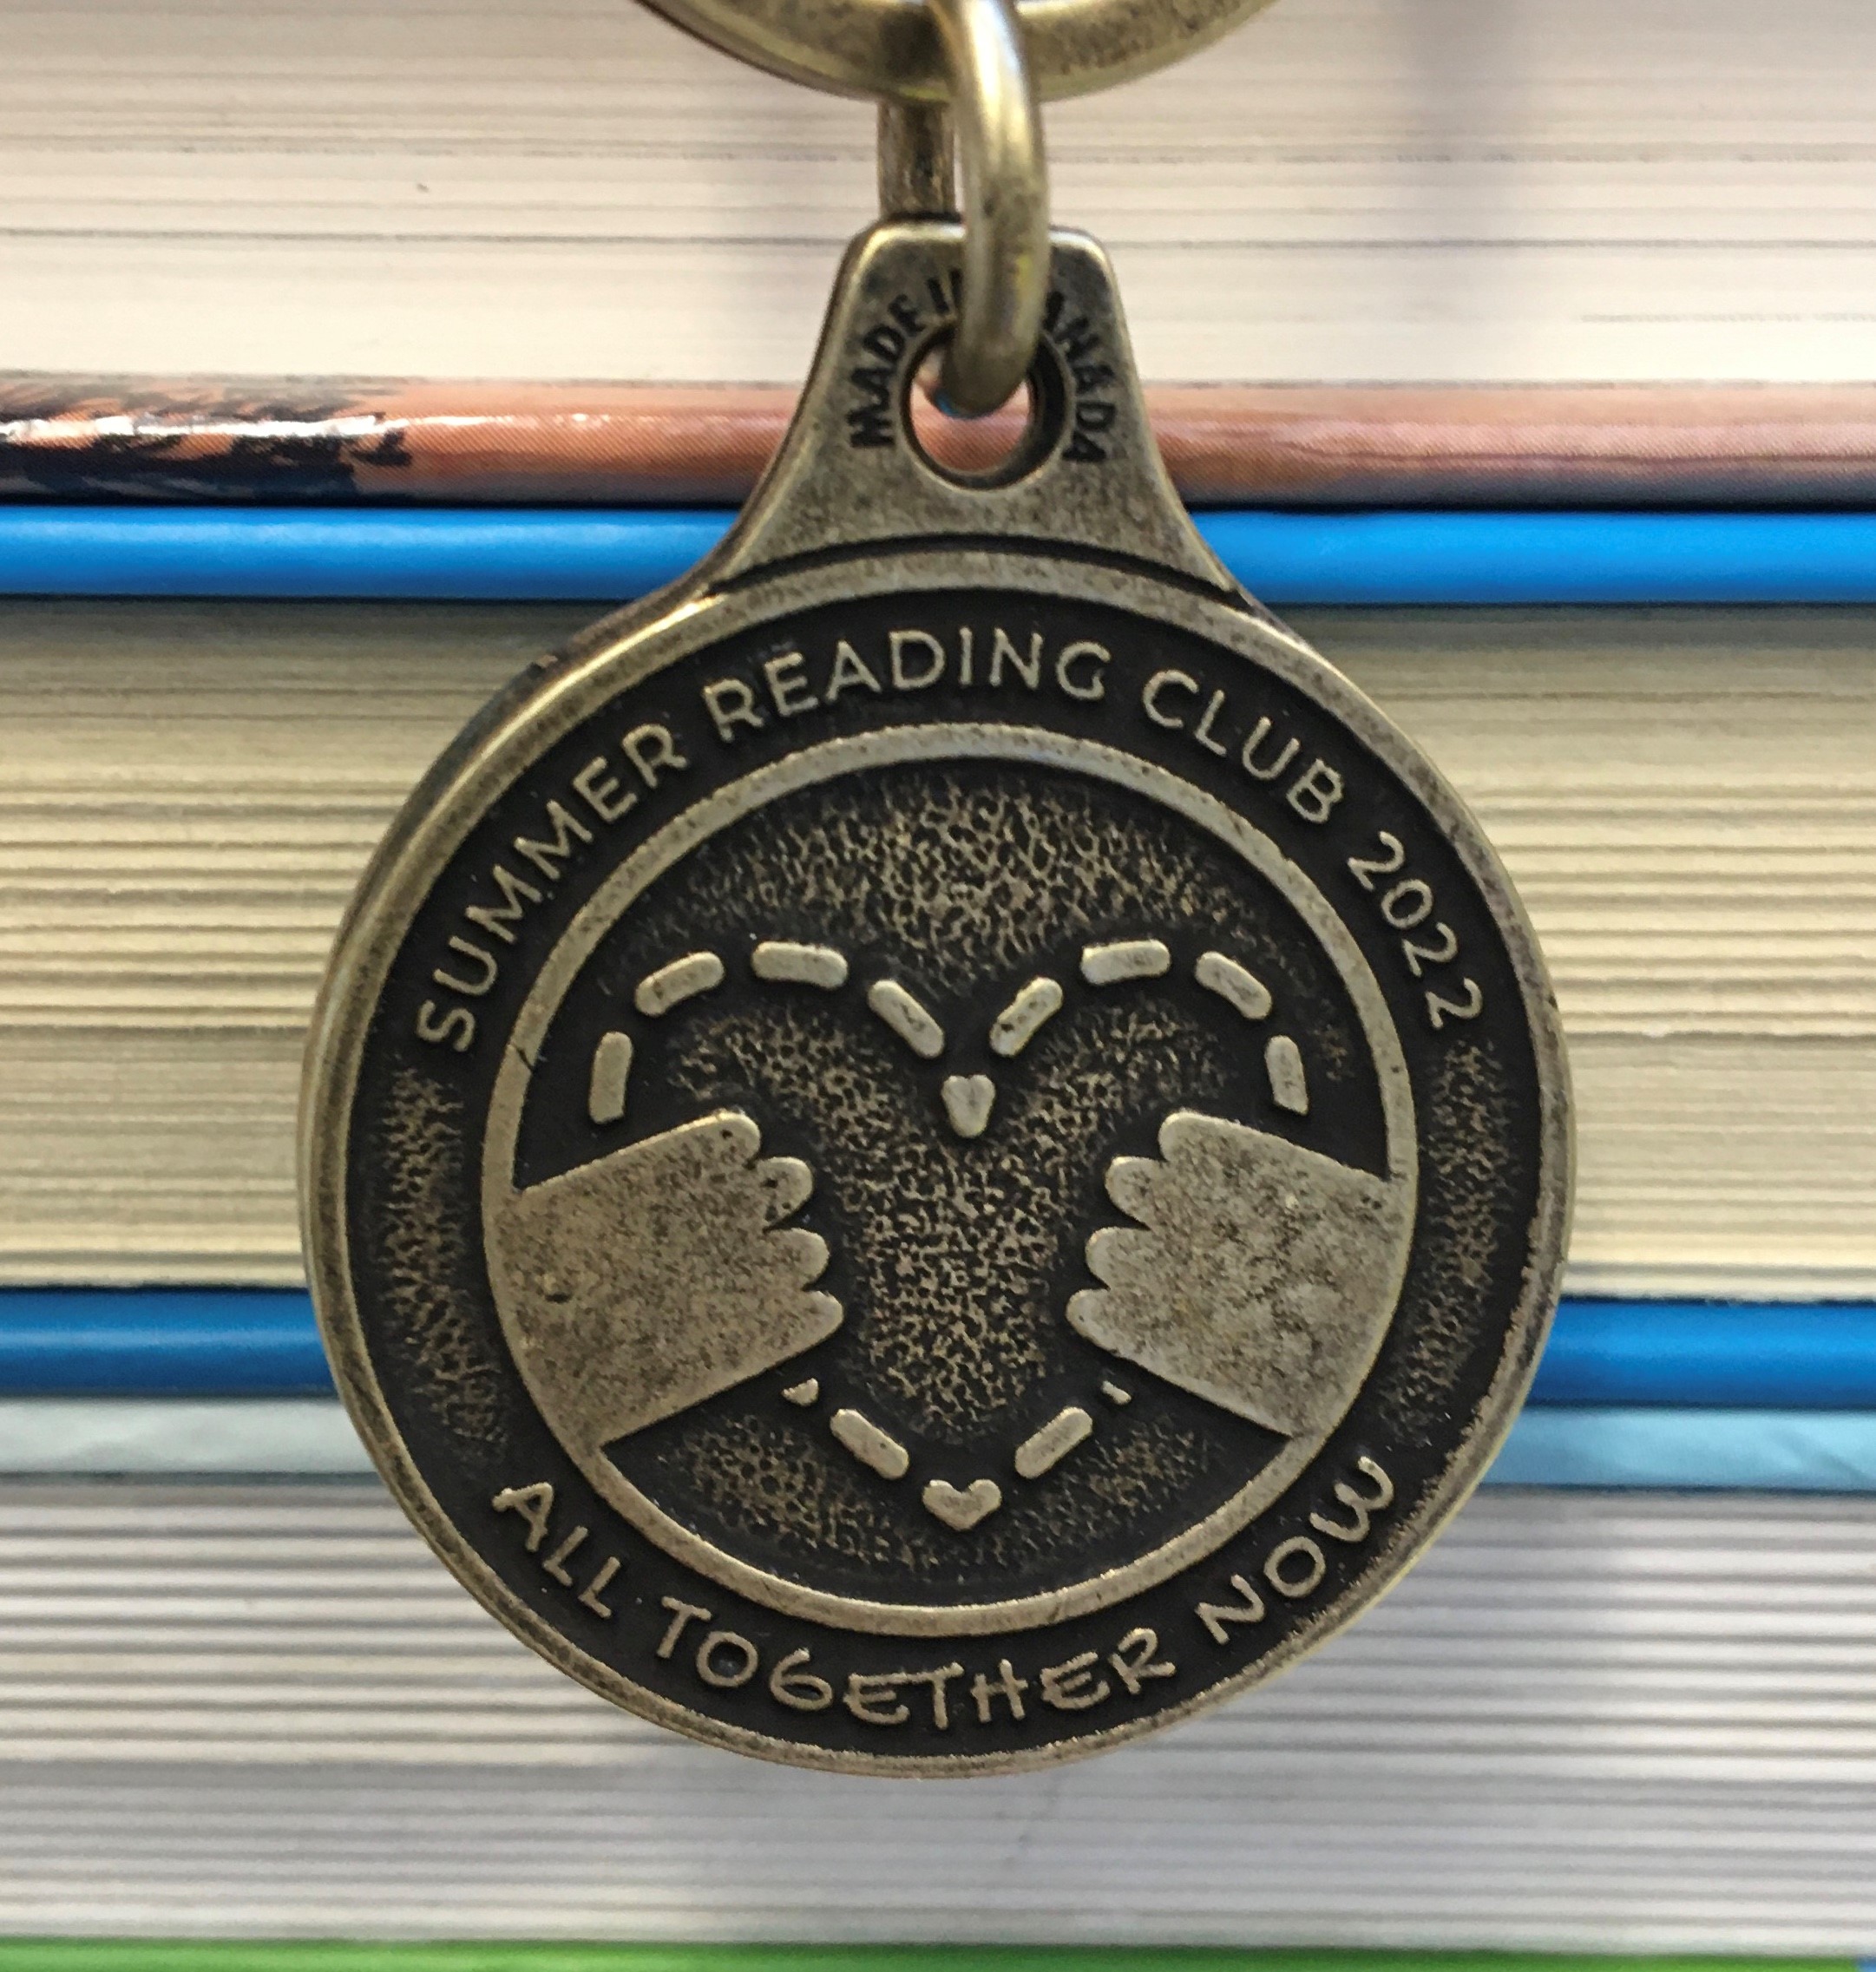 A past year's Summer Reading Club Medal hangs in front of a pile of books.